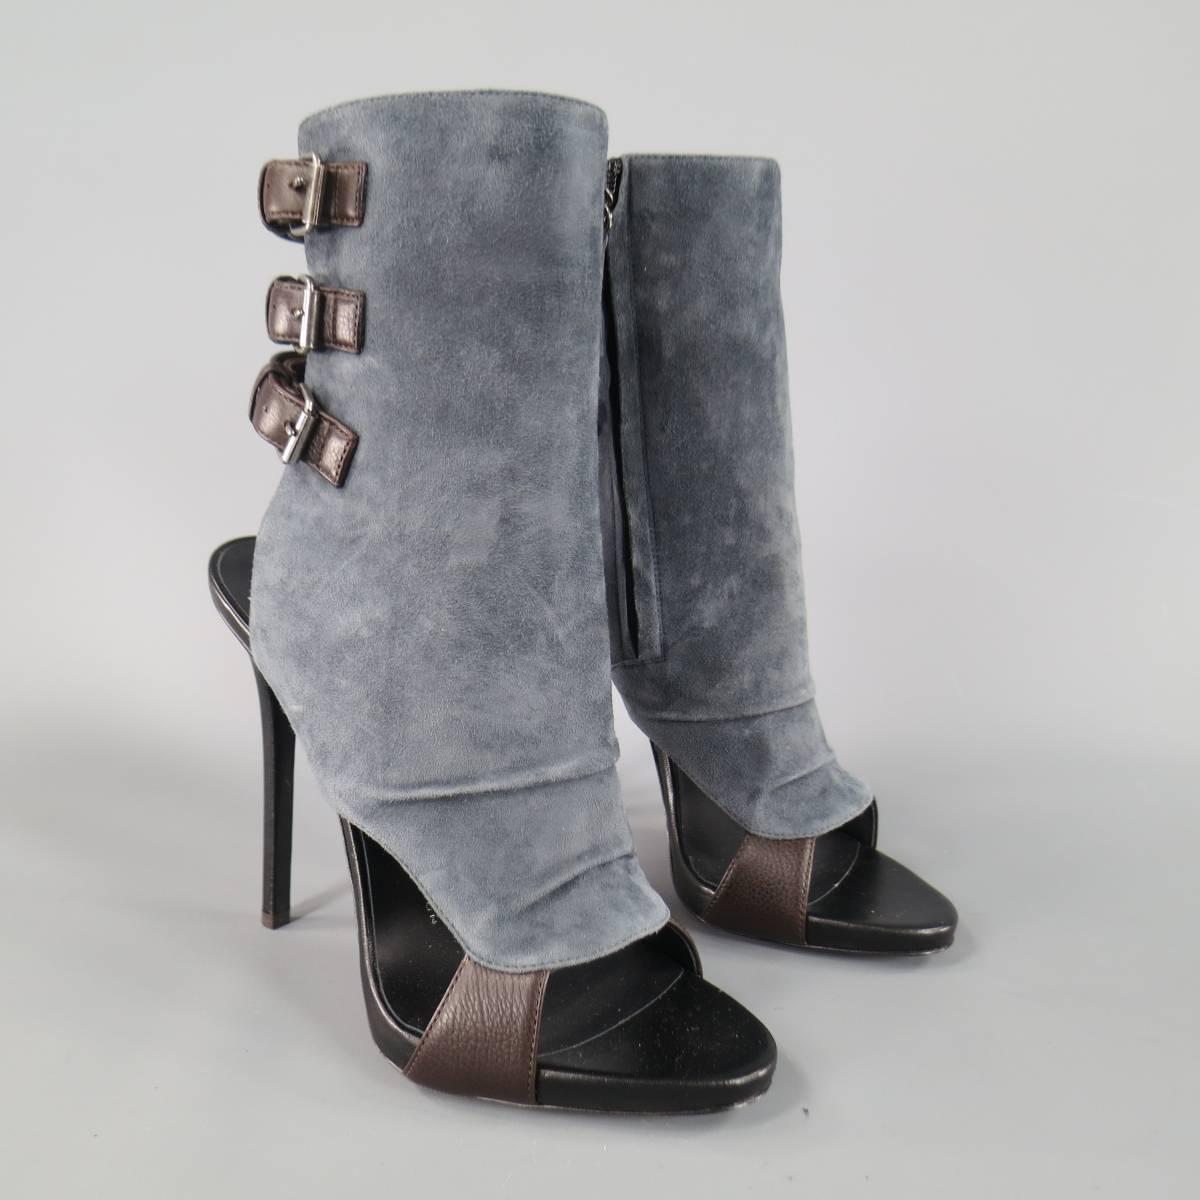 Fabulous GIUSEPPE ZANOTTI sandal boots featuring a muted blue gray suede shaft, peep toe front, black platform sole, open back, internal zip closure, and brown leather buckle straps. Made in Italy.
 
New without Tags Condition.
Marked: IT 38.5
